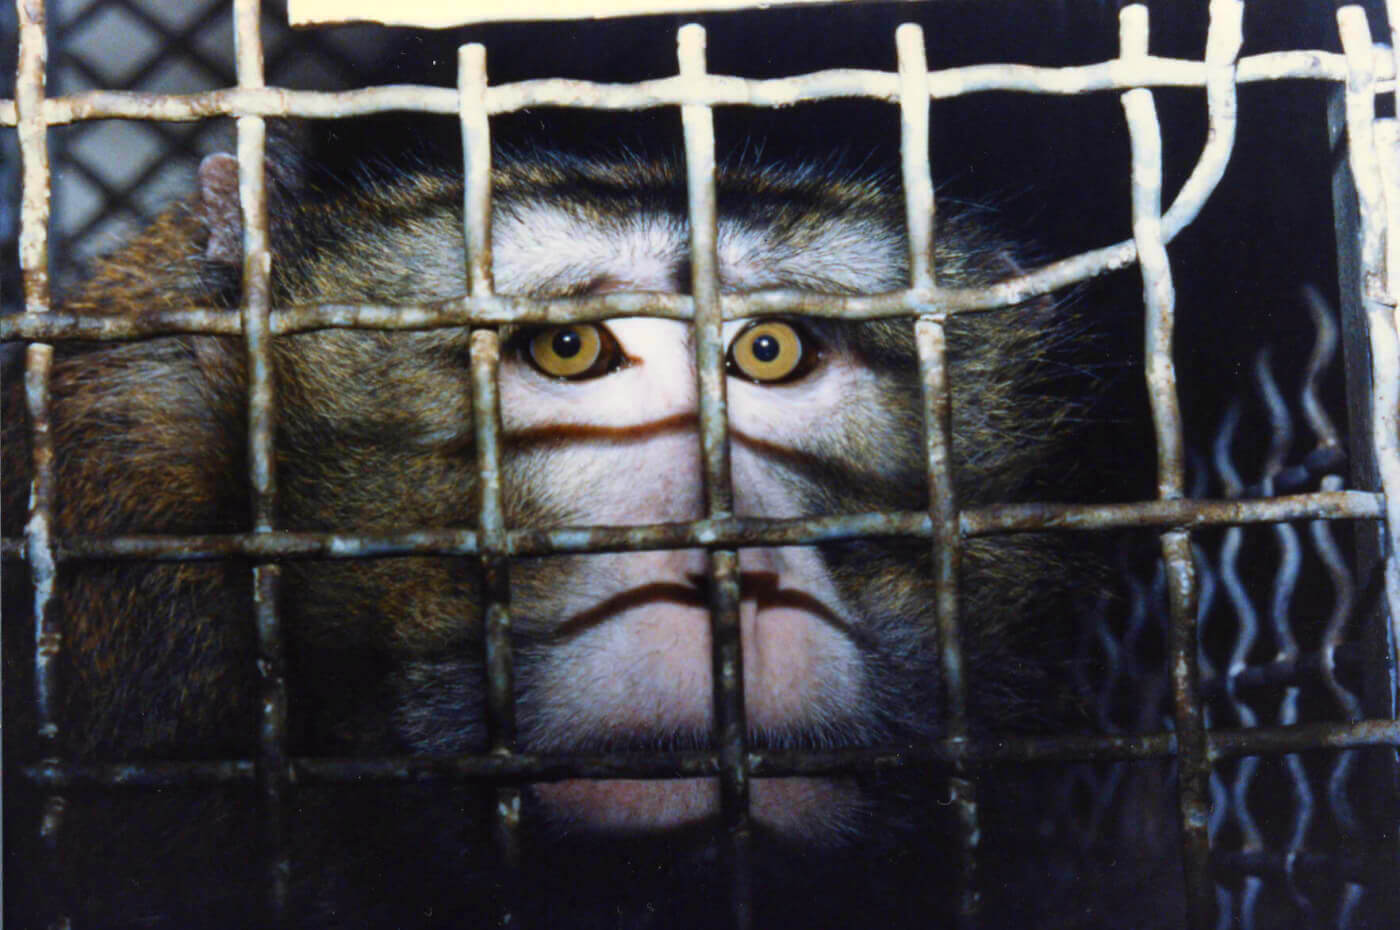 Chester, a monkey in a cage in Silver Springs